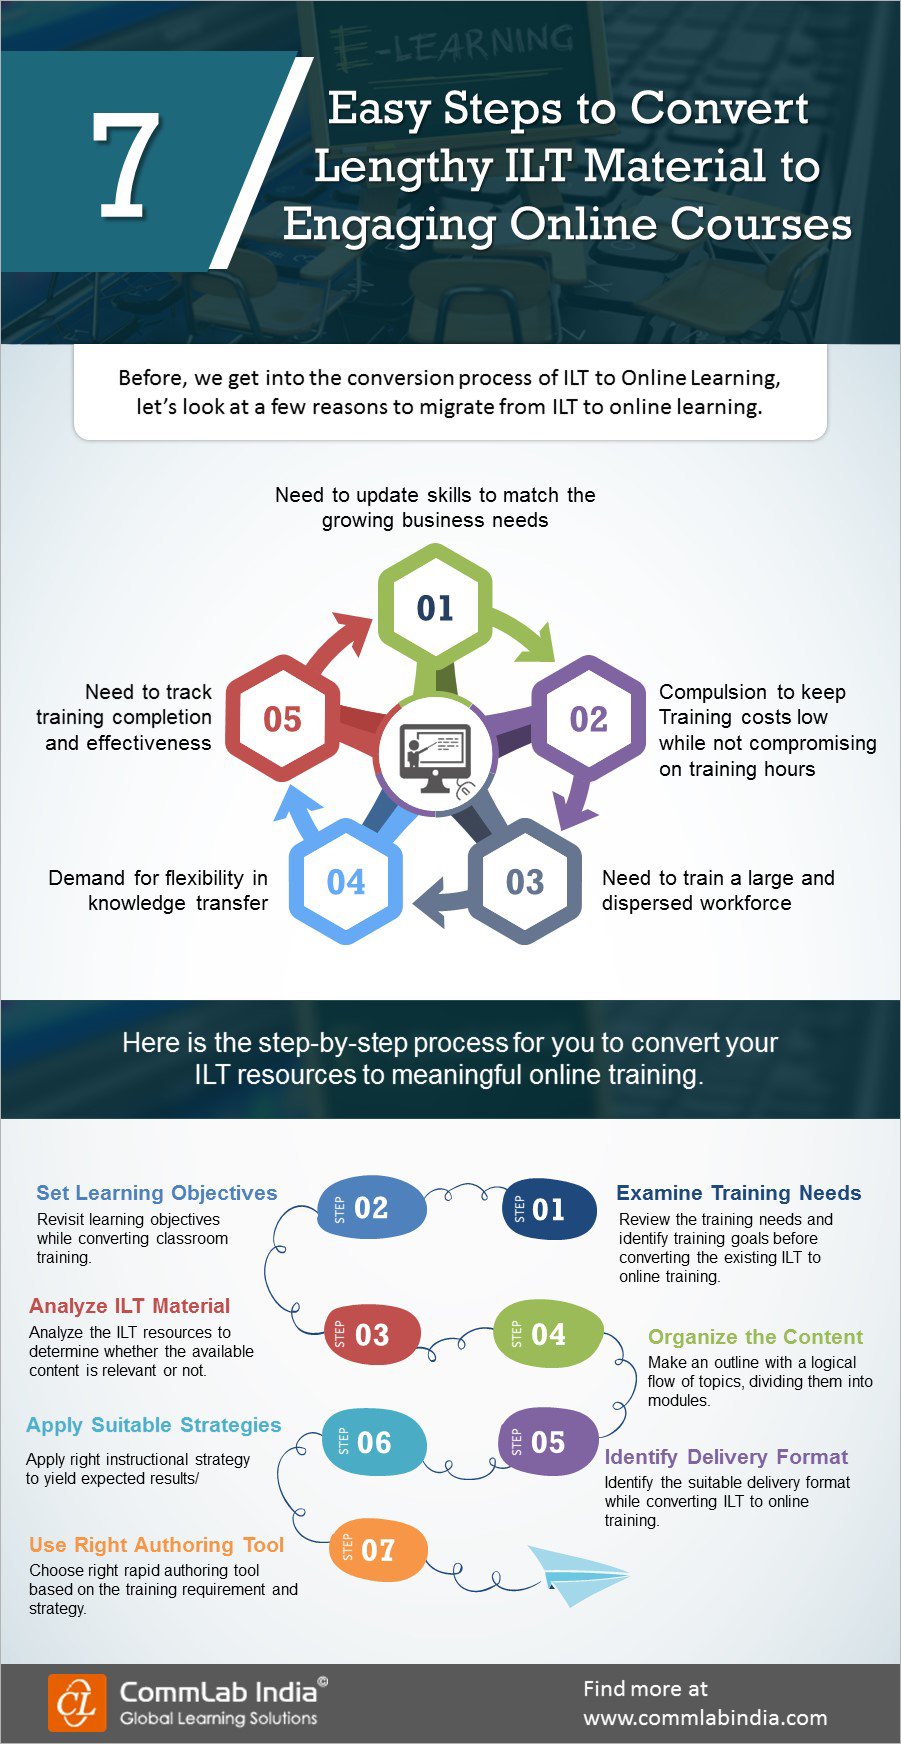 7 Easy Steps to Convert Lengthy ILT Material to Engaging Online Course [Infographic]